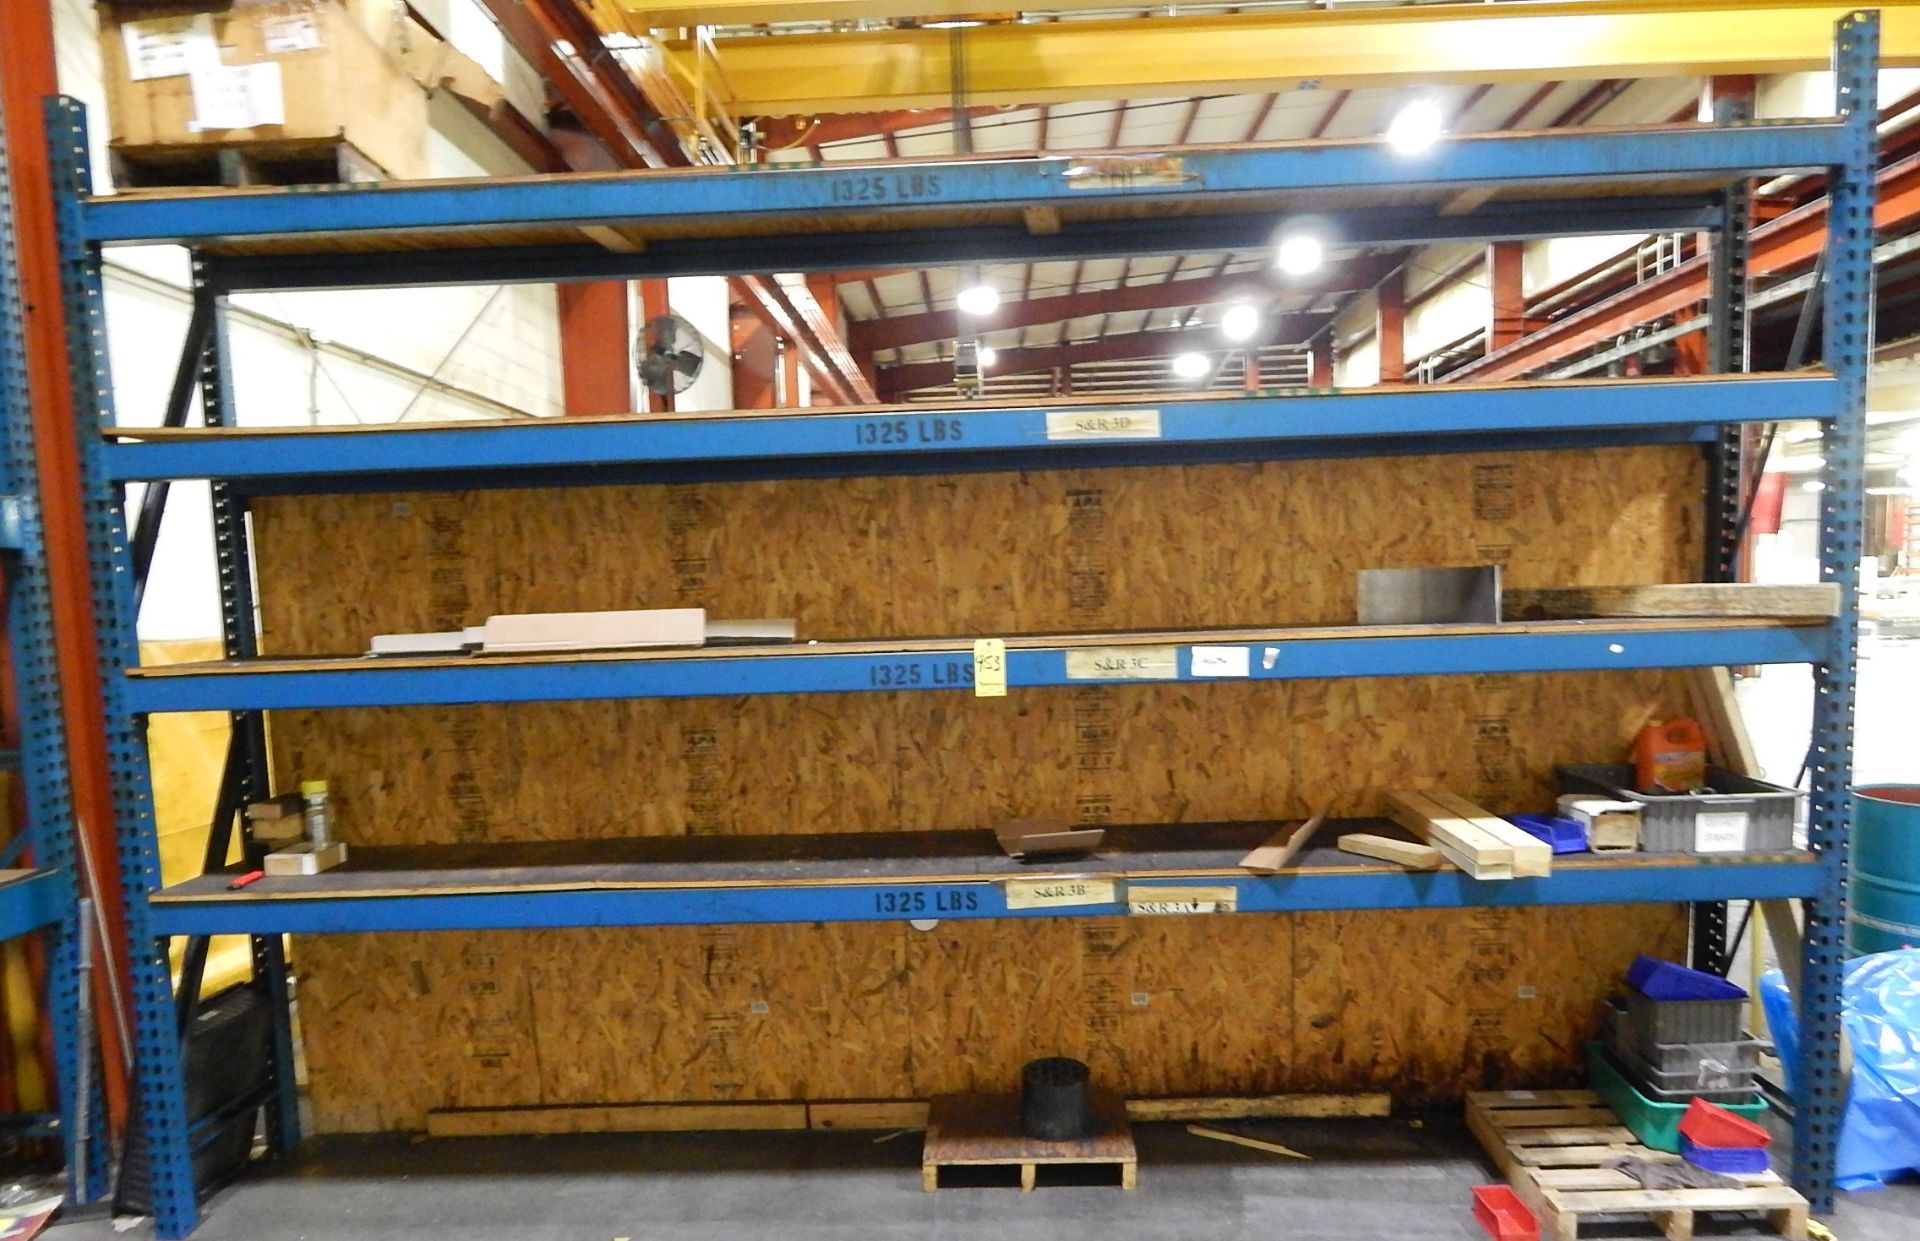 Pallet Racking, (1) Section, 2 Uprights, 8 Cross Beams, 10' Height, 26" Deep, 14' Wide, 4" Beams